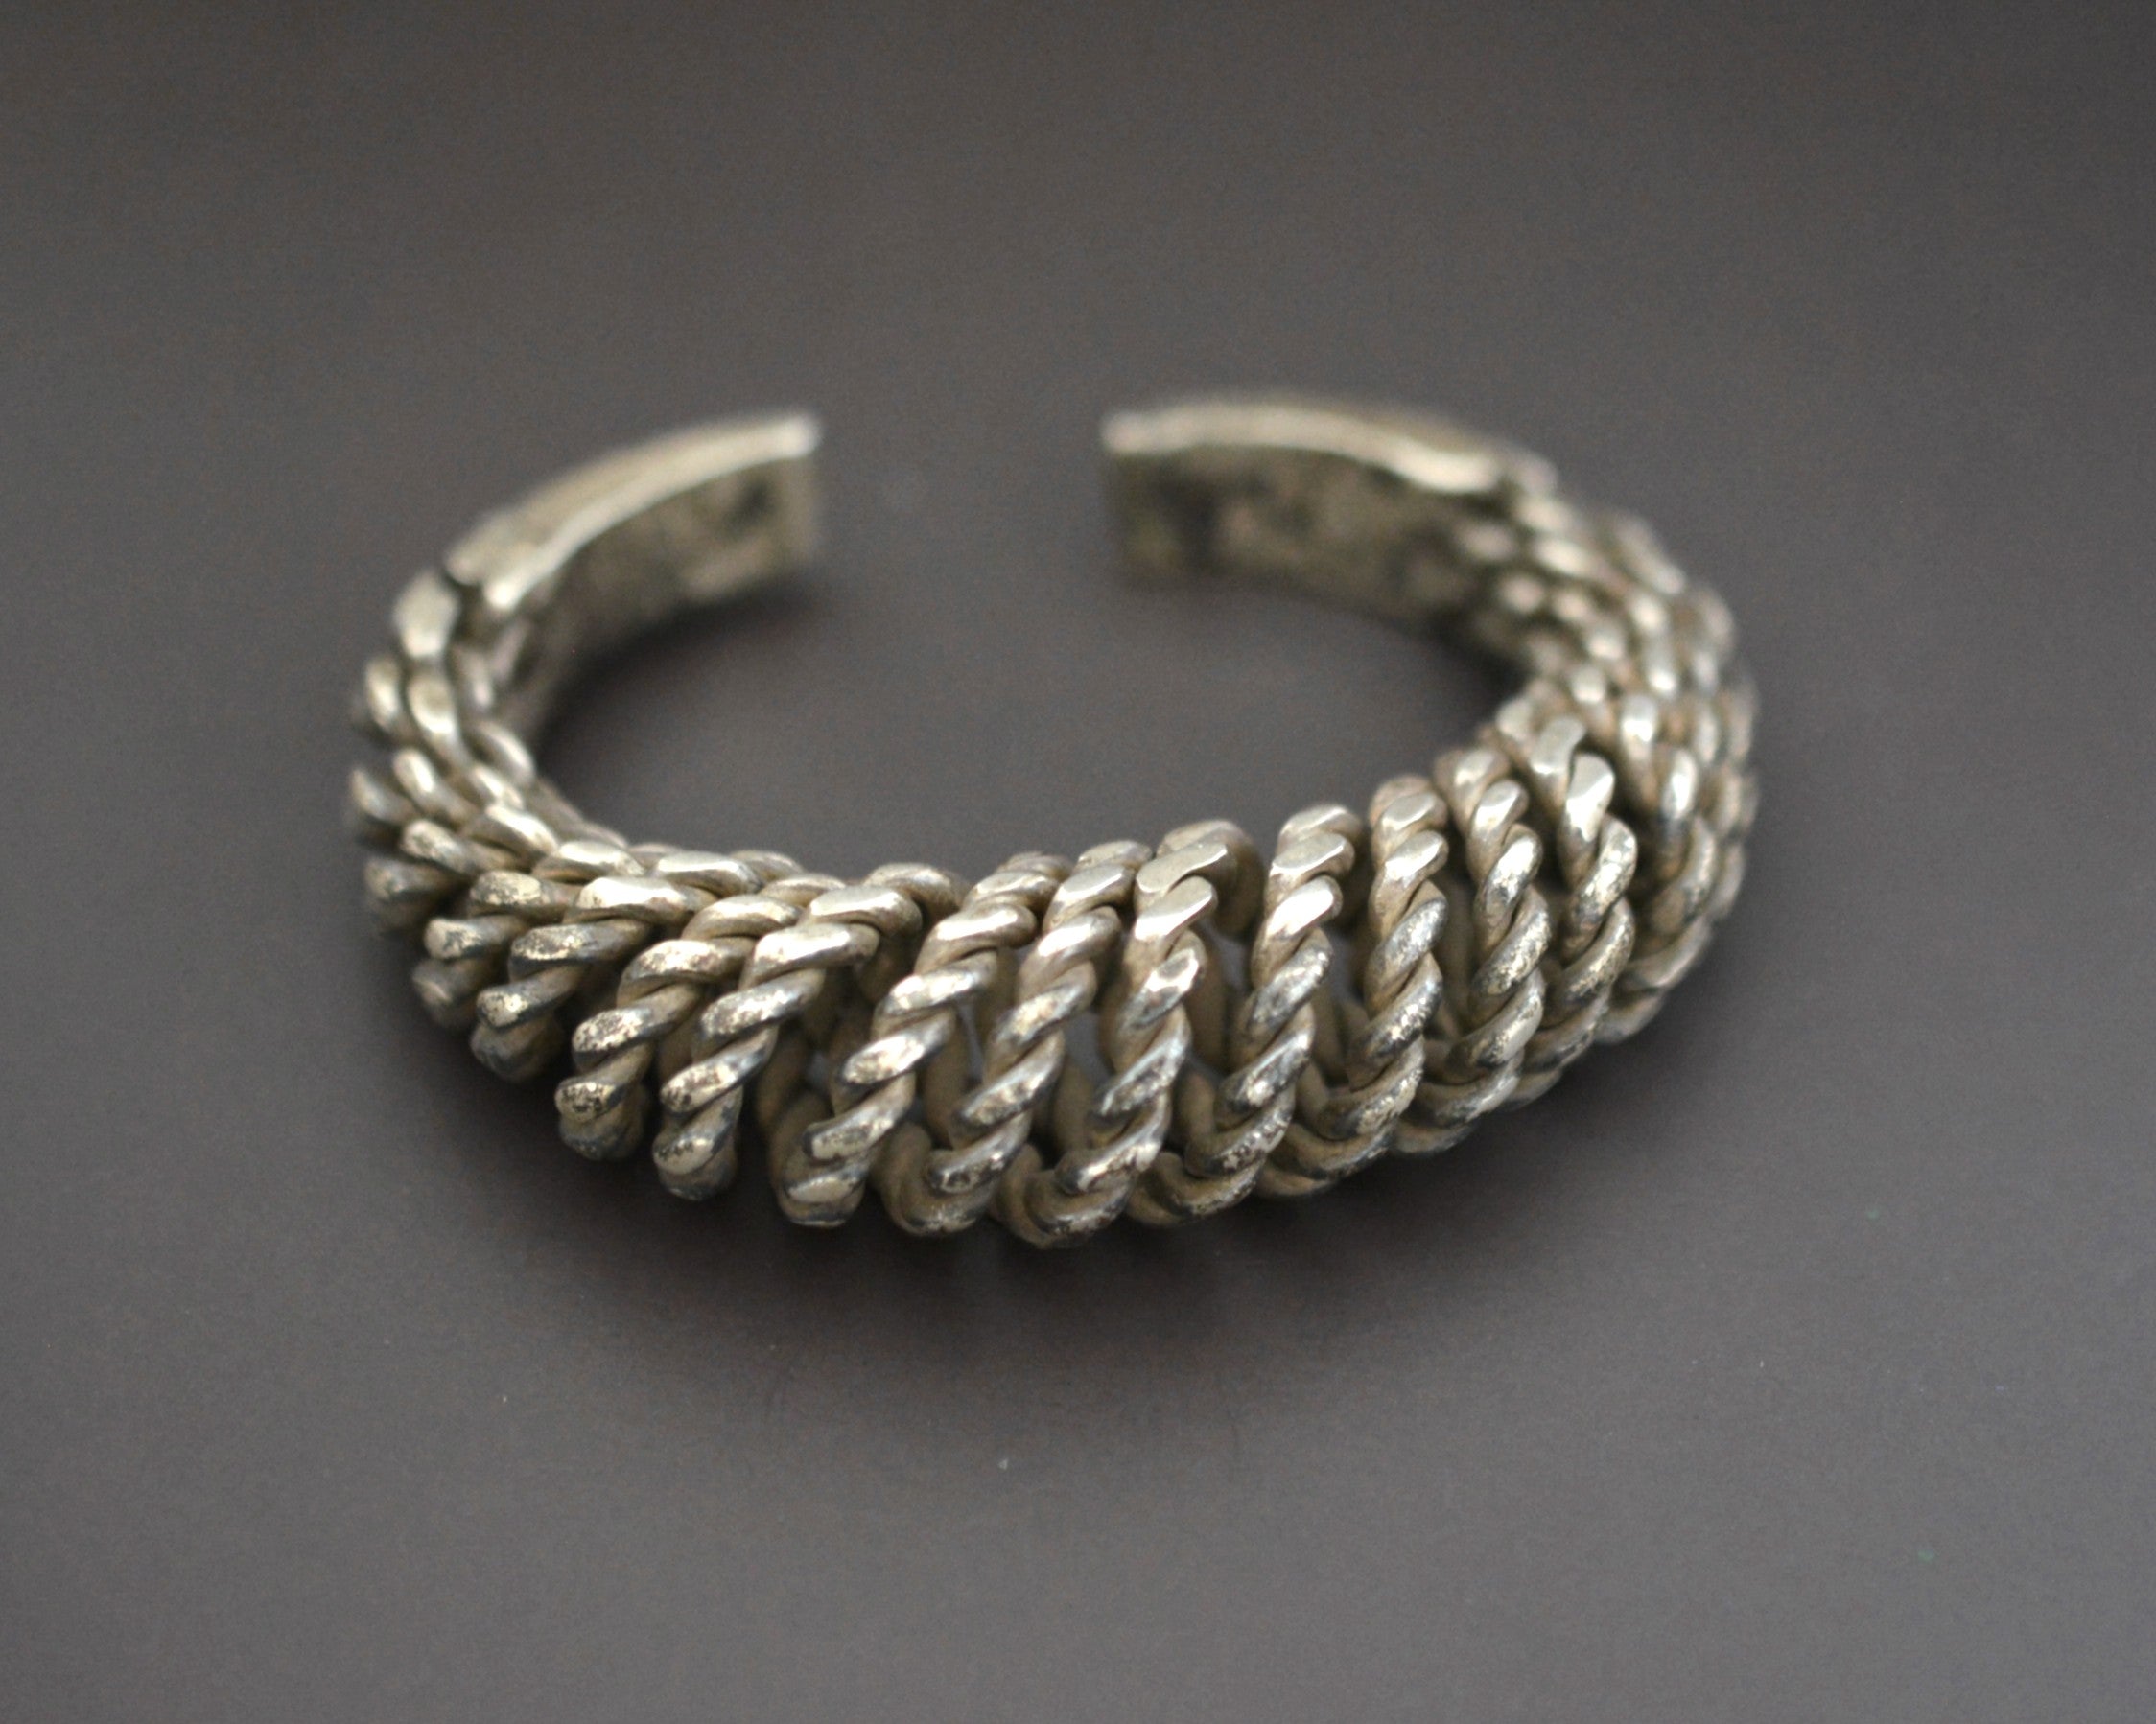 Reserved for M. - Akha Bracelet from Laos - SMALL